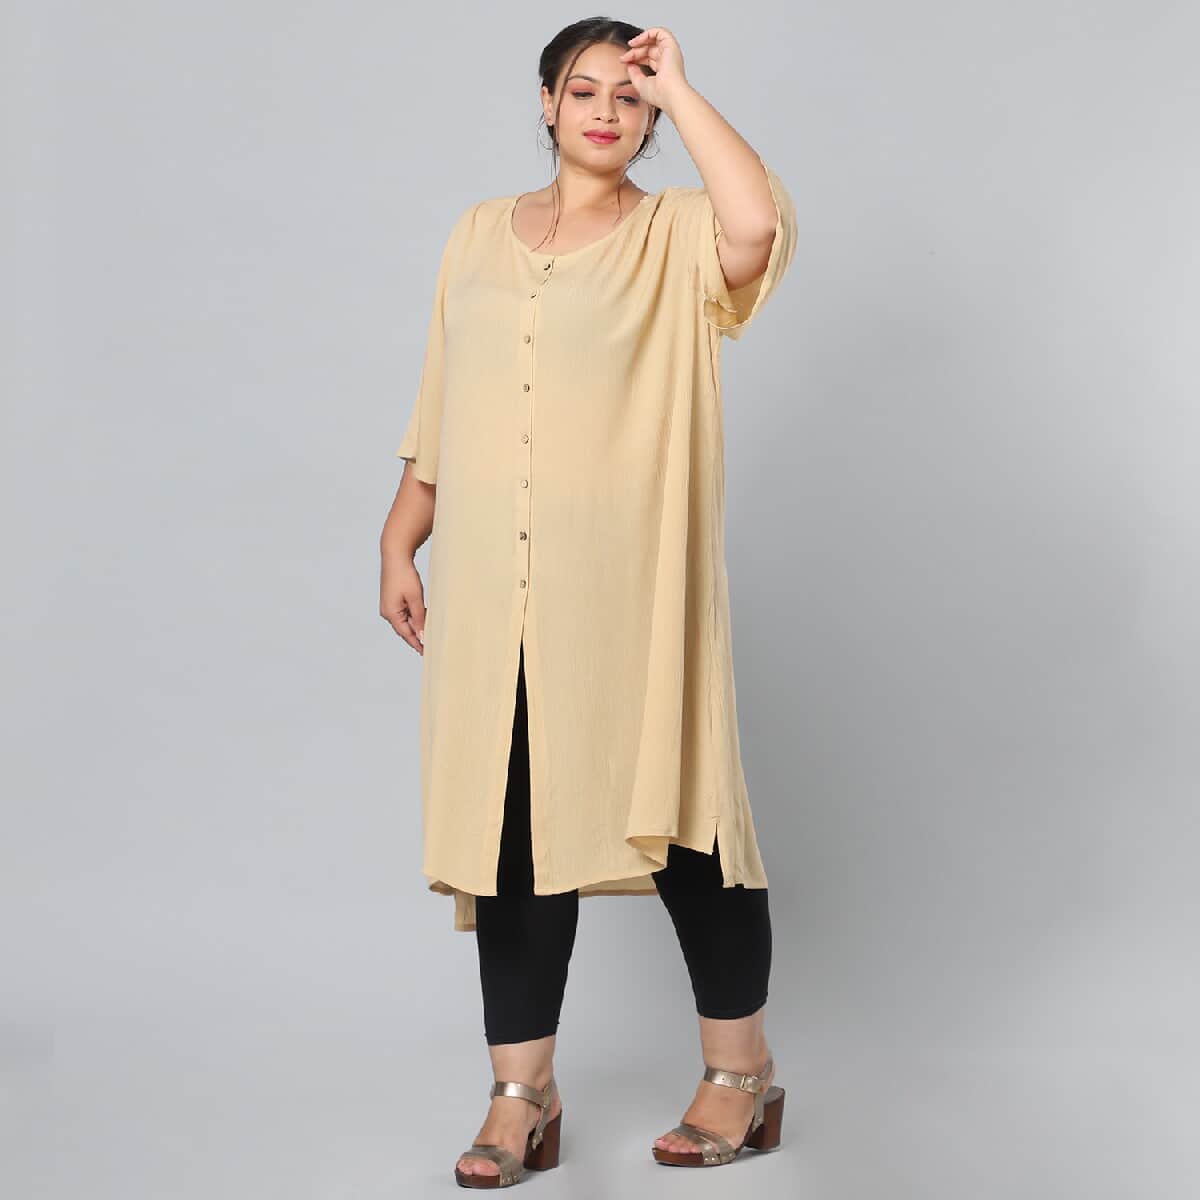 Beige 100% Rayon Top with Front Closure with Button- L/XL image number 3